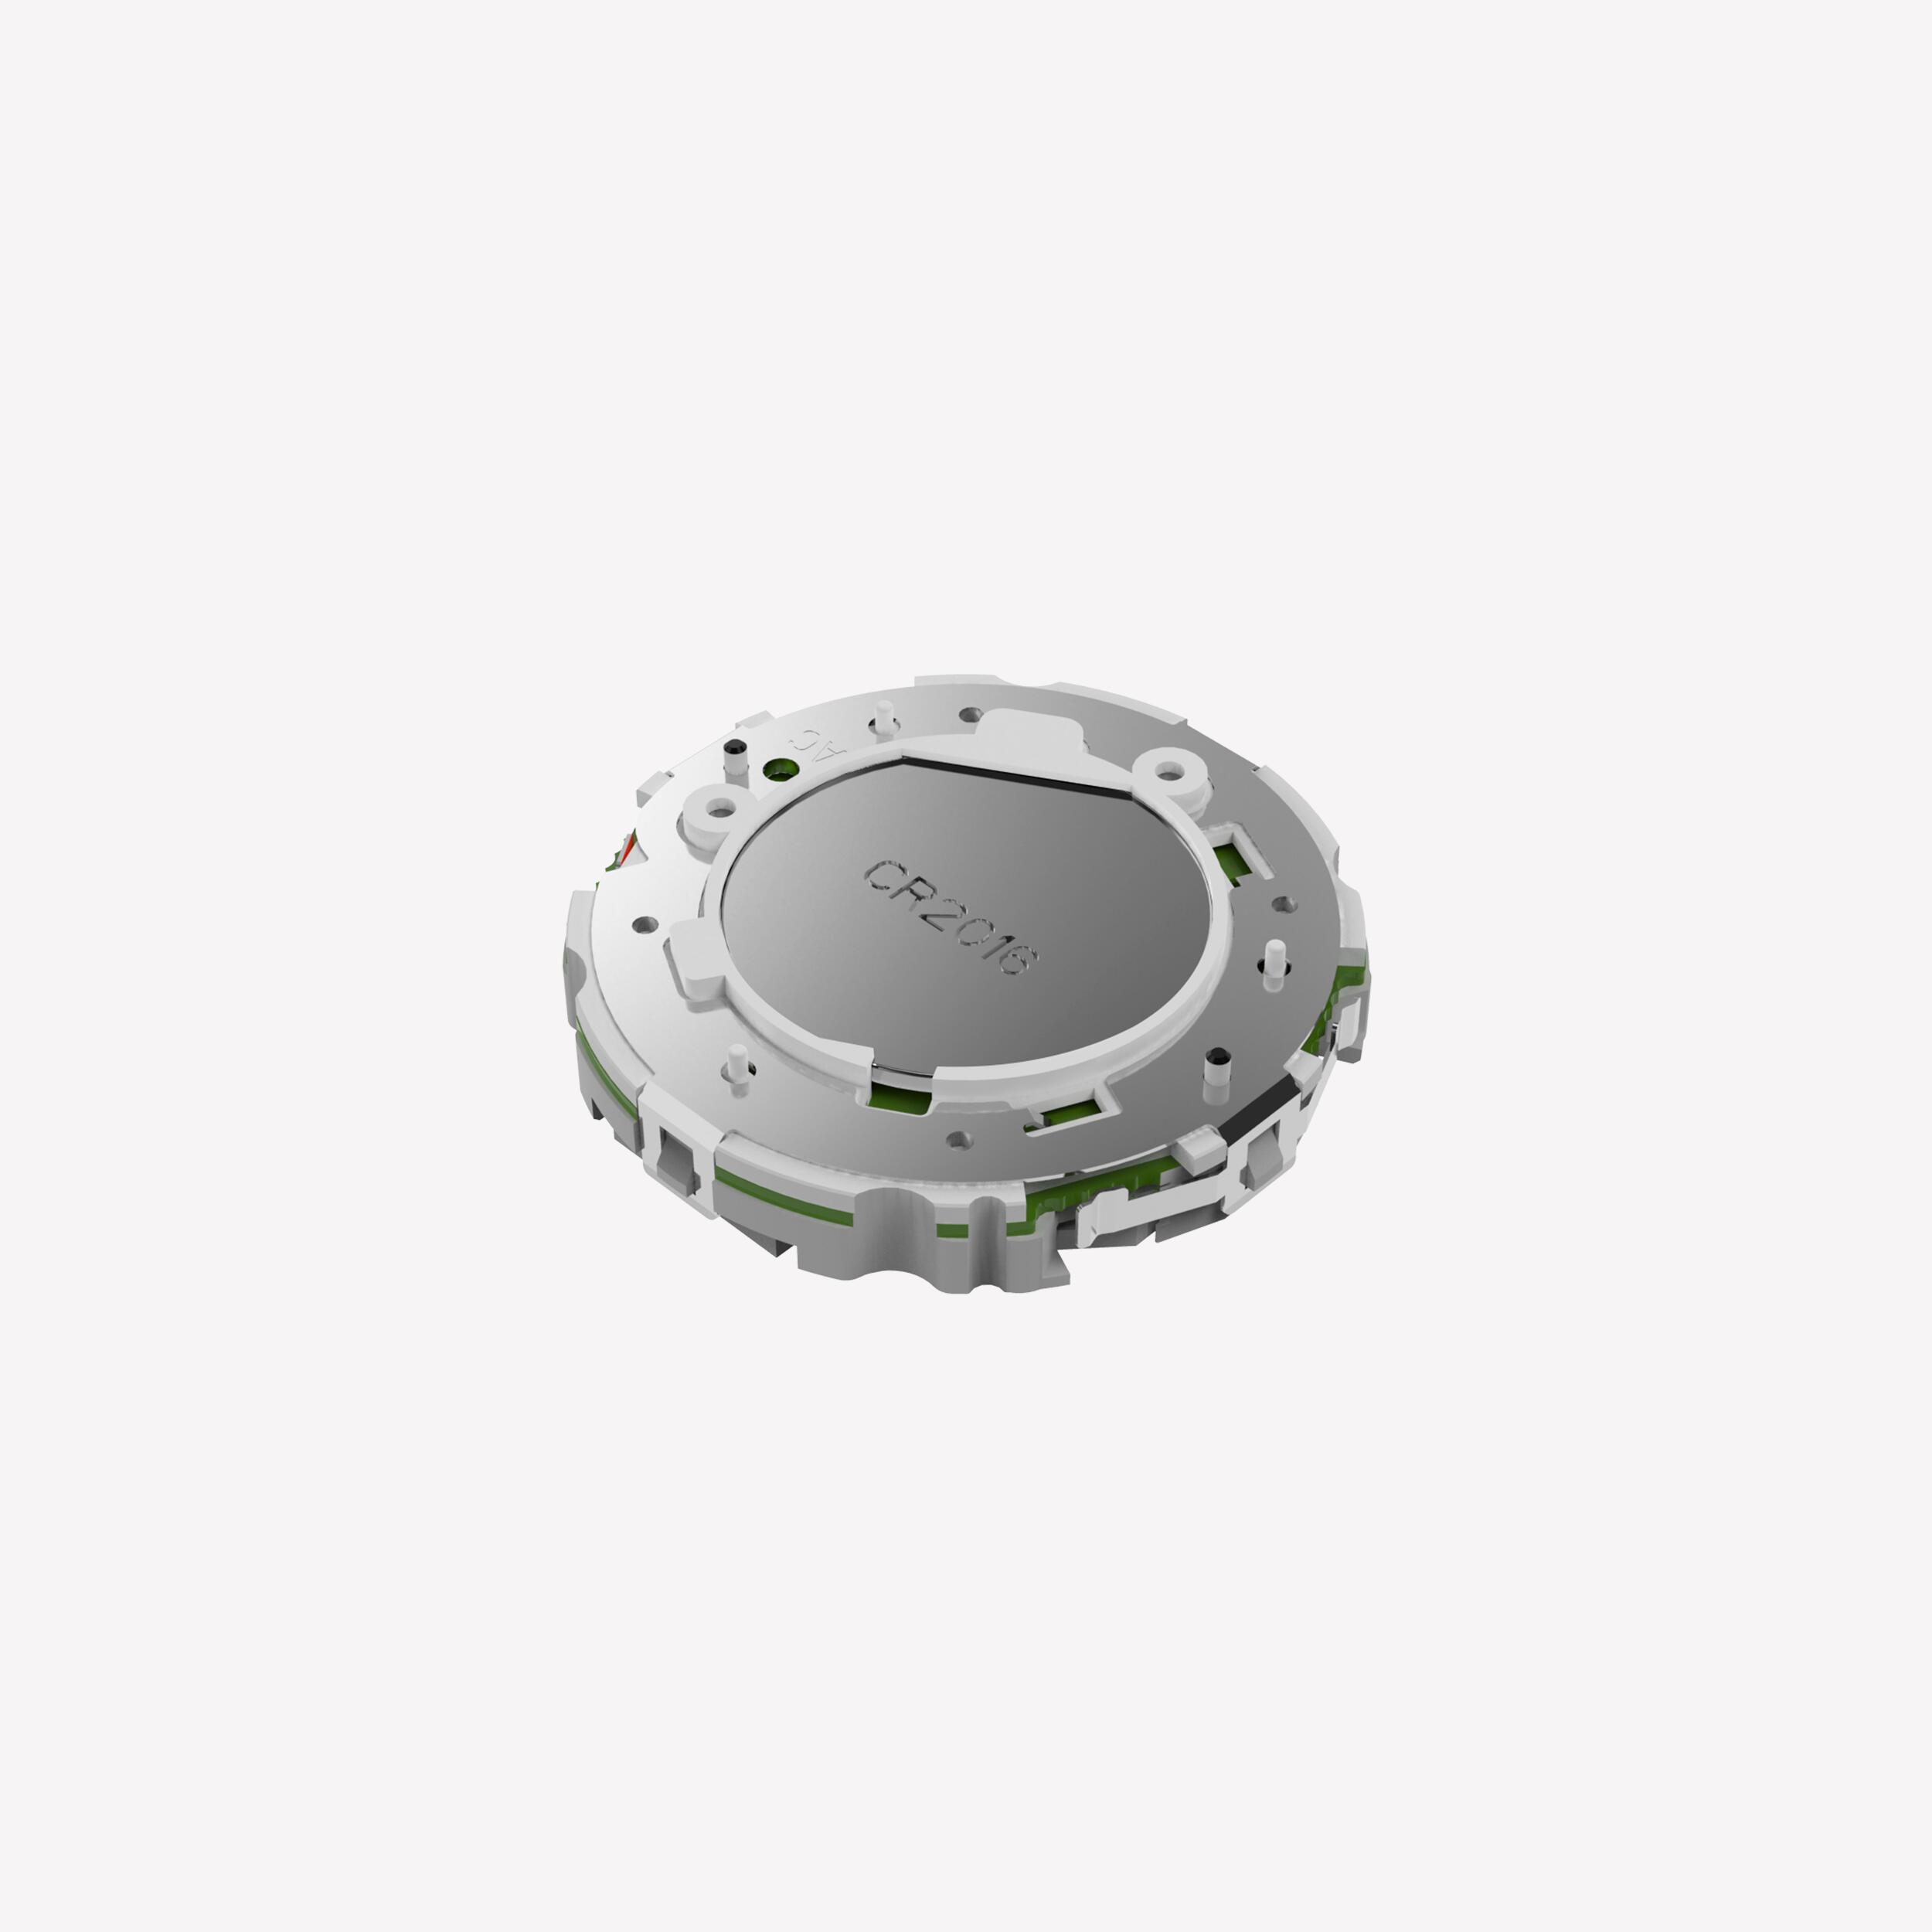 Electronic module W100 / ATW watch - Spare part 2/2